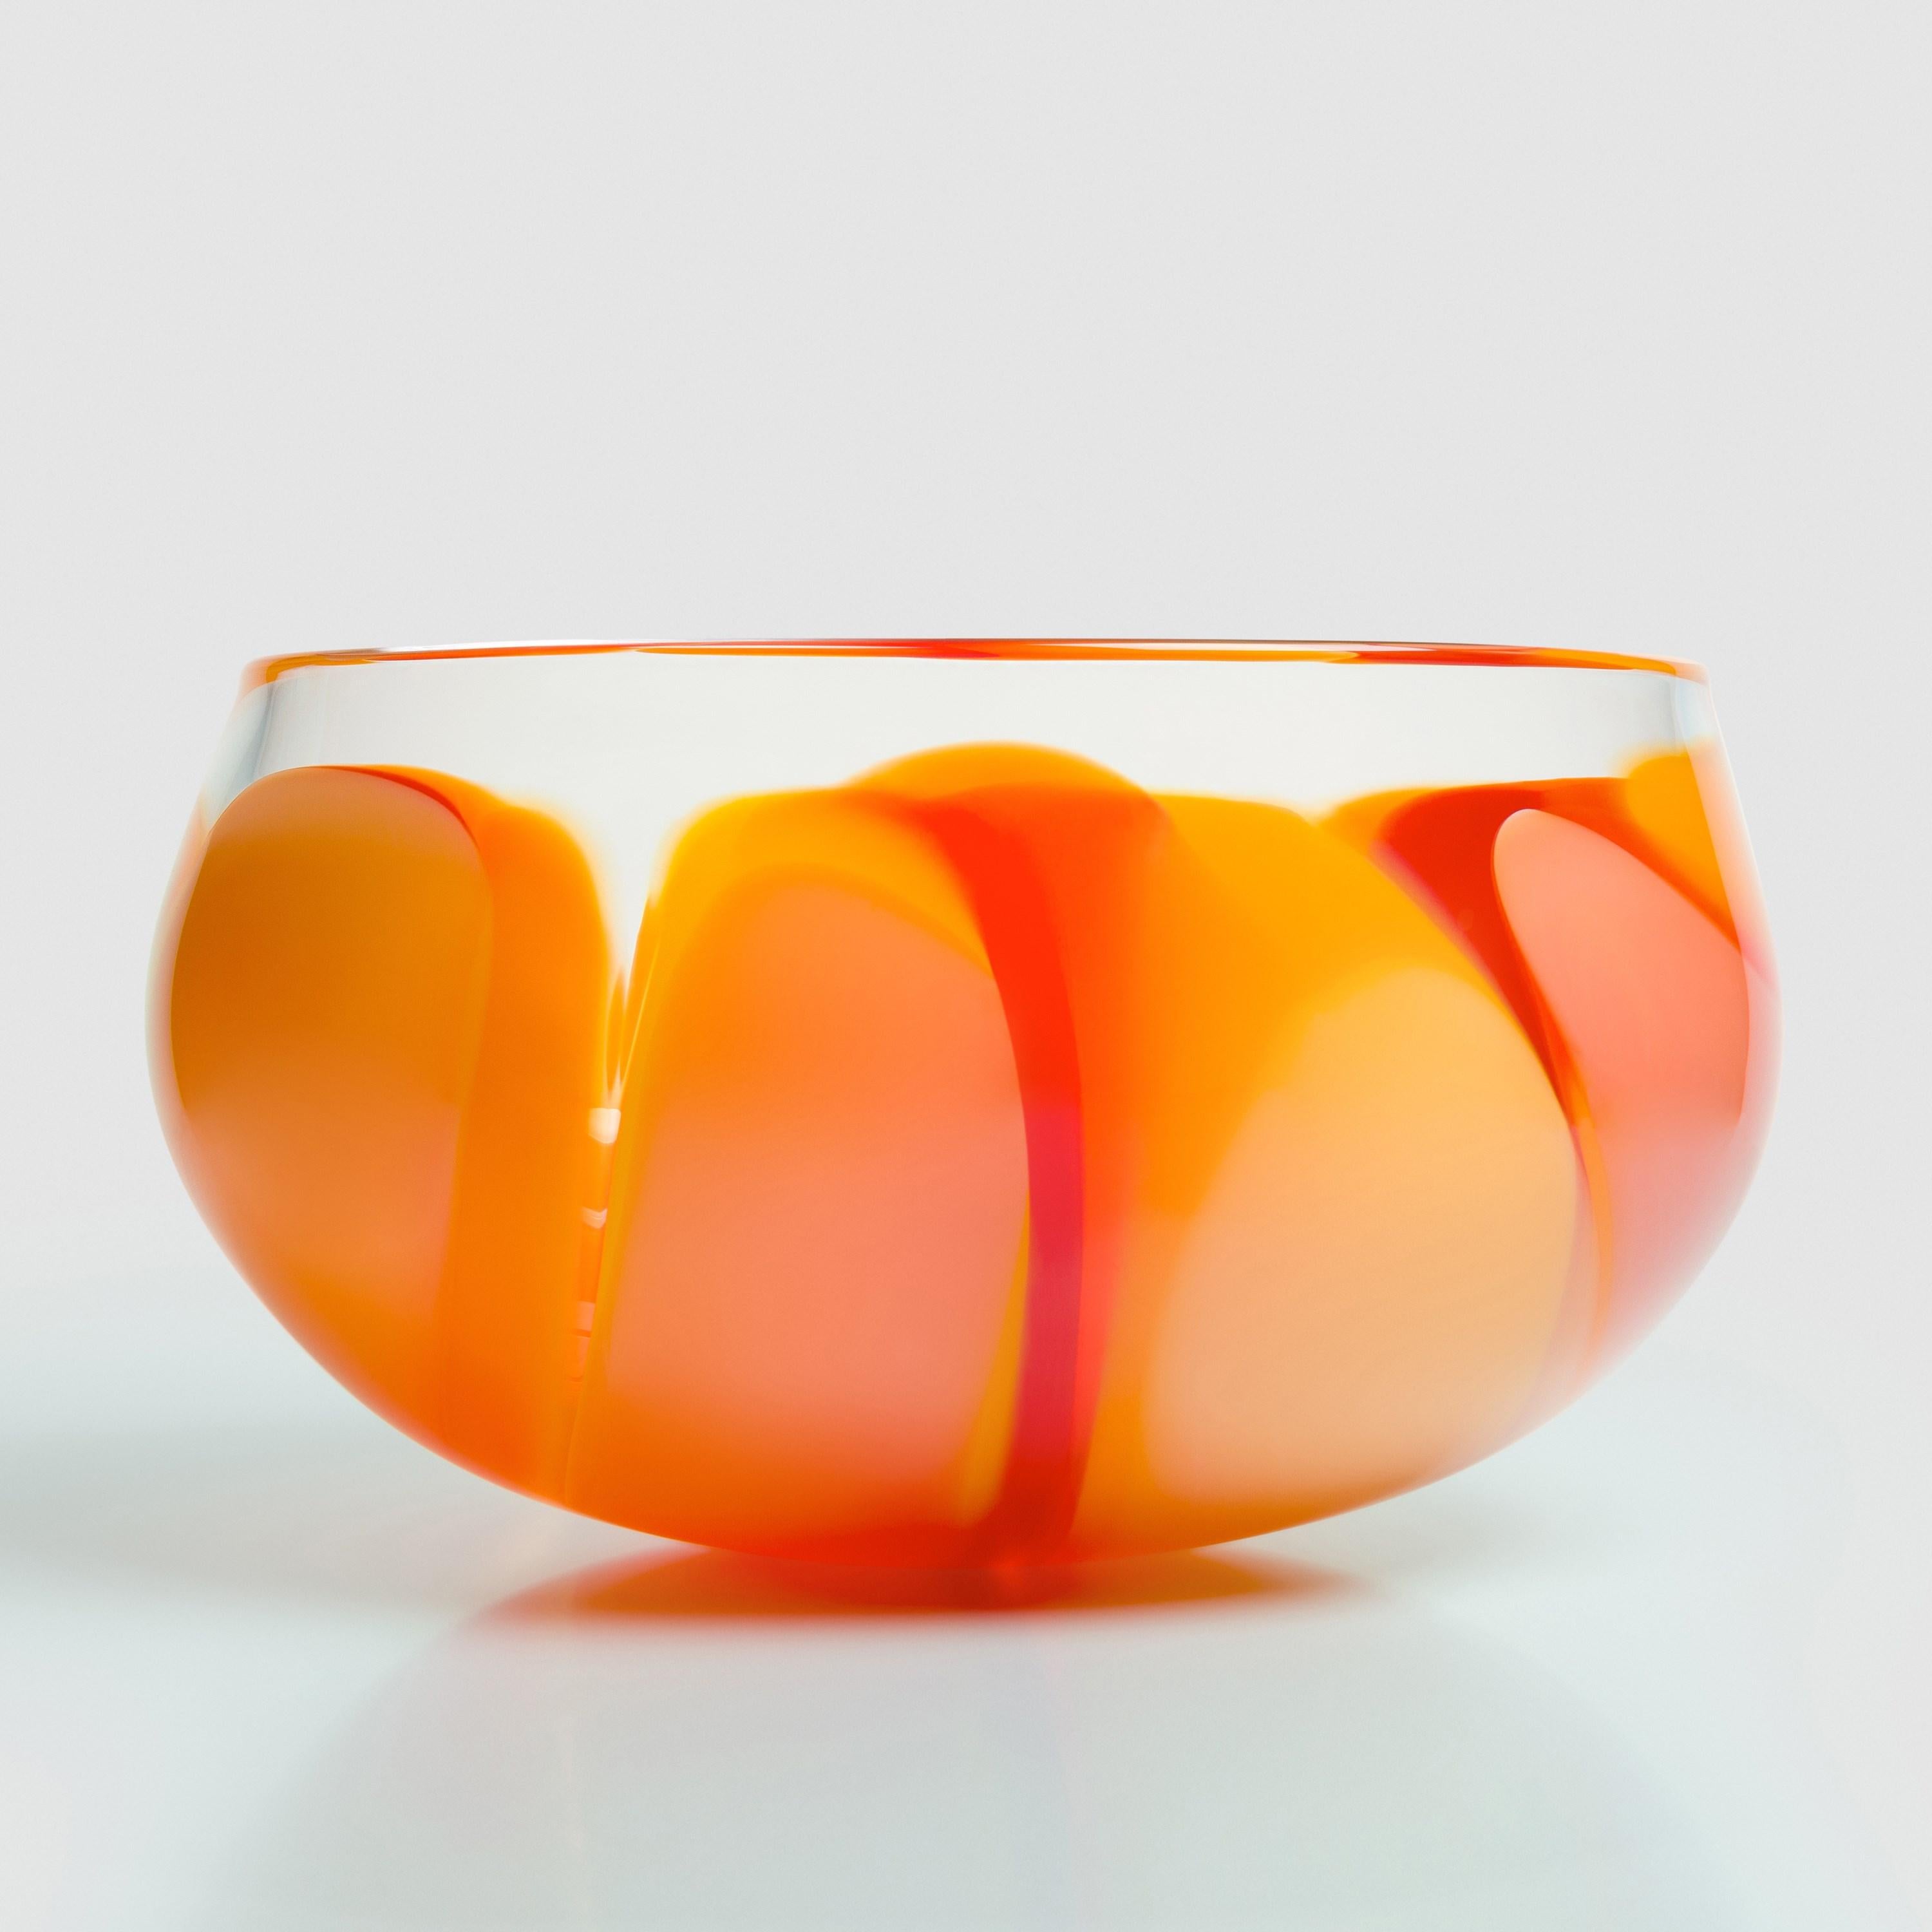 'Waves No 646' is a handblown glass bowl by the British artist, Neil Wilkin.

'Waves' is a collection of beautifully crafted, unique glass bowls and centrepieces by the British artist Neil Wilkin. Taking a painterly approach, Neil Wilkin merges his